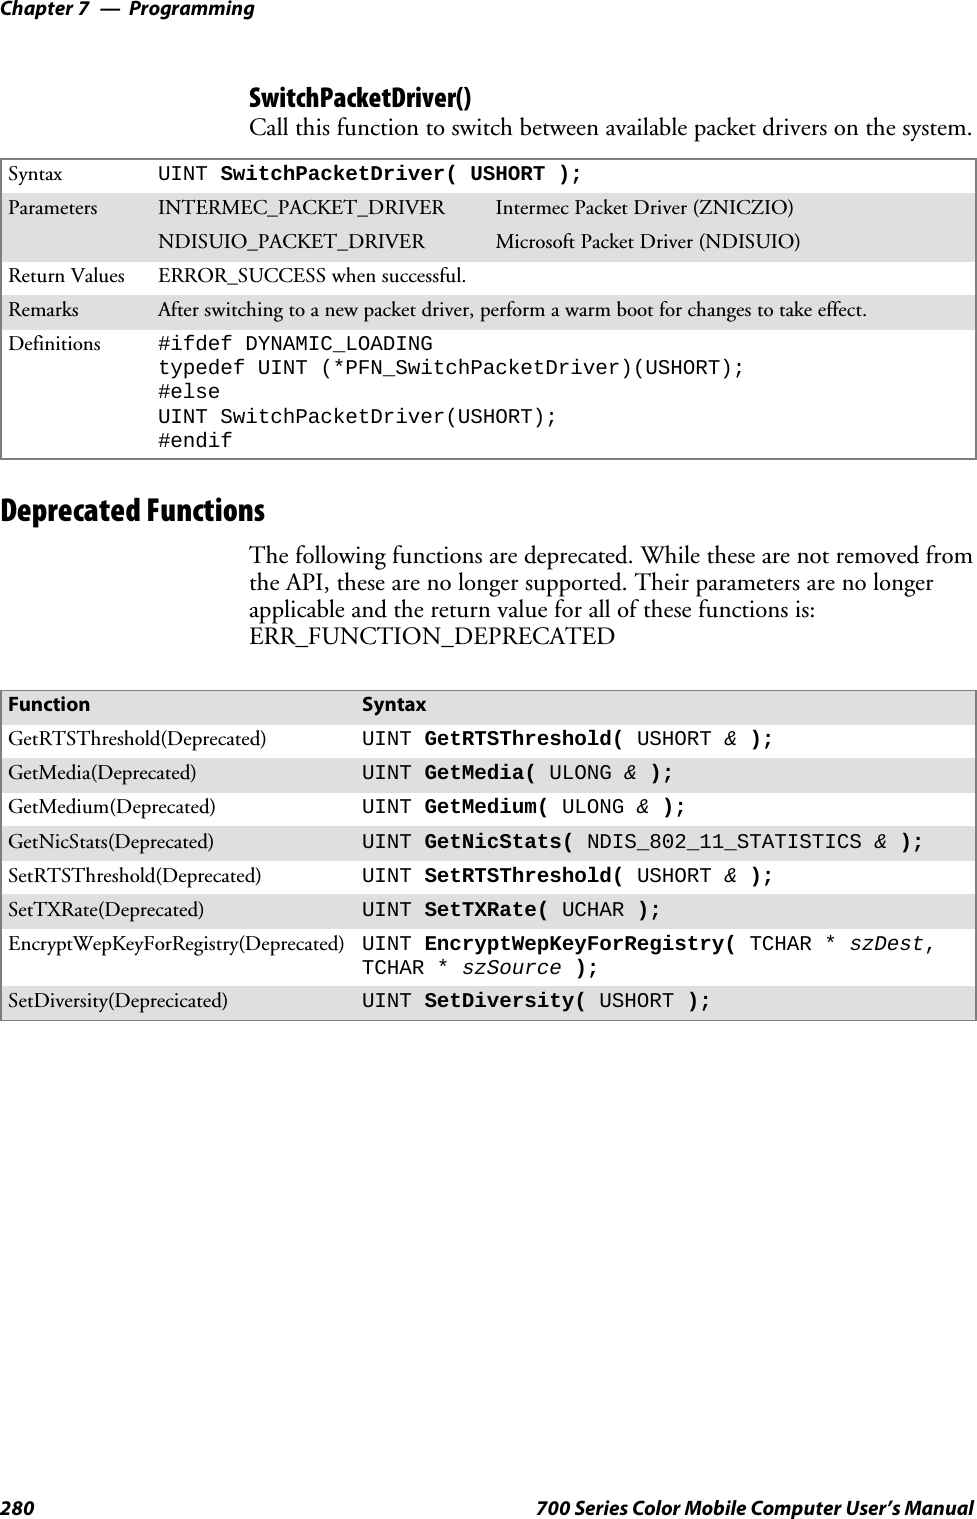 ProgrammingChapter —7280 700 Series Color Mobile Computer User’s ManualSwitchPacketDriver()Call this function to switch between available packet drivers on the system.Syntax UINT SwitchPacketDriver( USHORT );Parameters INTERMEC_PACKET_DRIVER Intermec Packet Driver (ZNICZIO)NDISUIO_PACKET_DRIVER Microsoft Packet Driver (NDISUIO)Return Values ERROR_SUCCESS when successful.Remarks After switching to a new packet driver, perform a warm boot for changes to take effect.Definitions #ifdef DYNAMIC_LOADINGtypedef UINT (*PFN_SwitchPacketDriver)(USHORT);#elseUINT SwitchPacketDriver(USHORT);#endifDeprecated FunctionsThe following functions are deprecated. While these are not removed fromthe API, these are no longer supported. Their parameters are no longerapplicable and the return value for all of these functions is:ERR_FUNCTION_DEPRECATEDFunction SyntaxGetRTSThreshold(Deprecated) UINT GetRTSThreshold( USHORT &amp;);GetMedia(Deprecated) UINT GetMedia( ULONG &amp;);GetMedium(Deprecated) UINT GetMedium( ULONG &amp;);GetNicStats(Deprecated) UINT GetNicStats( NDIS_802_11_STATISTICS &amp;);SetRTSThreshold(Deprecated) UINT SetRTSThreshold( USHORT &amp;);SetTXRate(Deprecated) UINT SetTXRate( UCHAR );EncryptWepKeyForRegistry(Deprecated) UINT EncryptWepKeyForRegistry( TCHAR * szDest,TCHAR * szSource );SetDiversity(Deprecicated) UINT SetDiversity( USHORT );